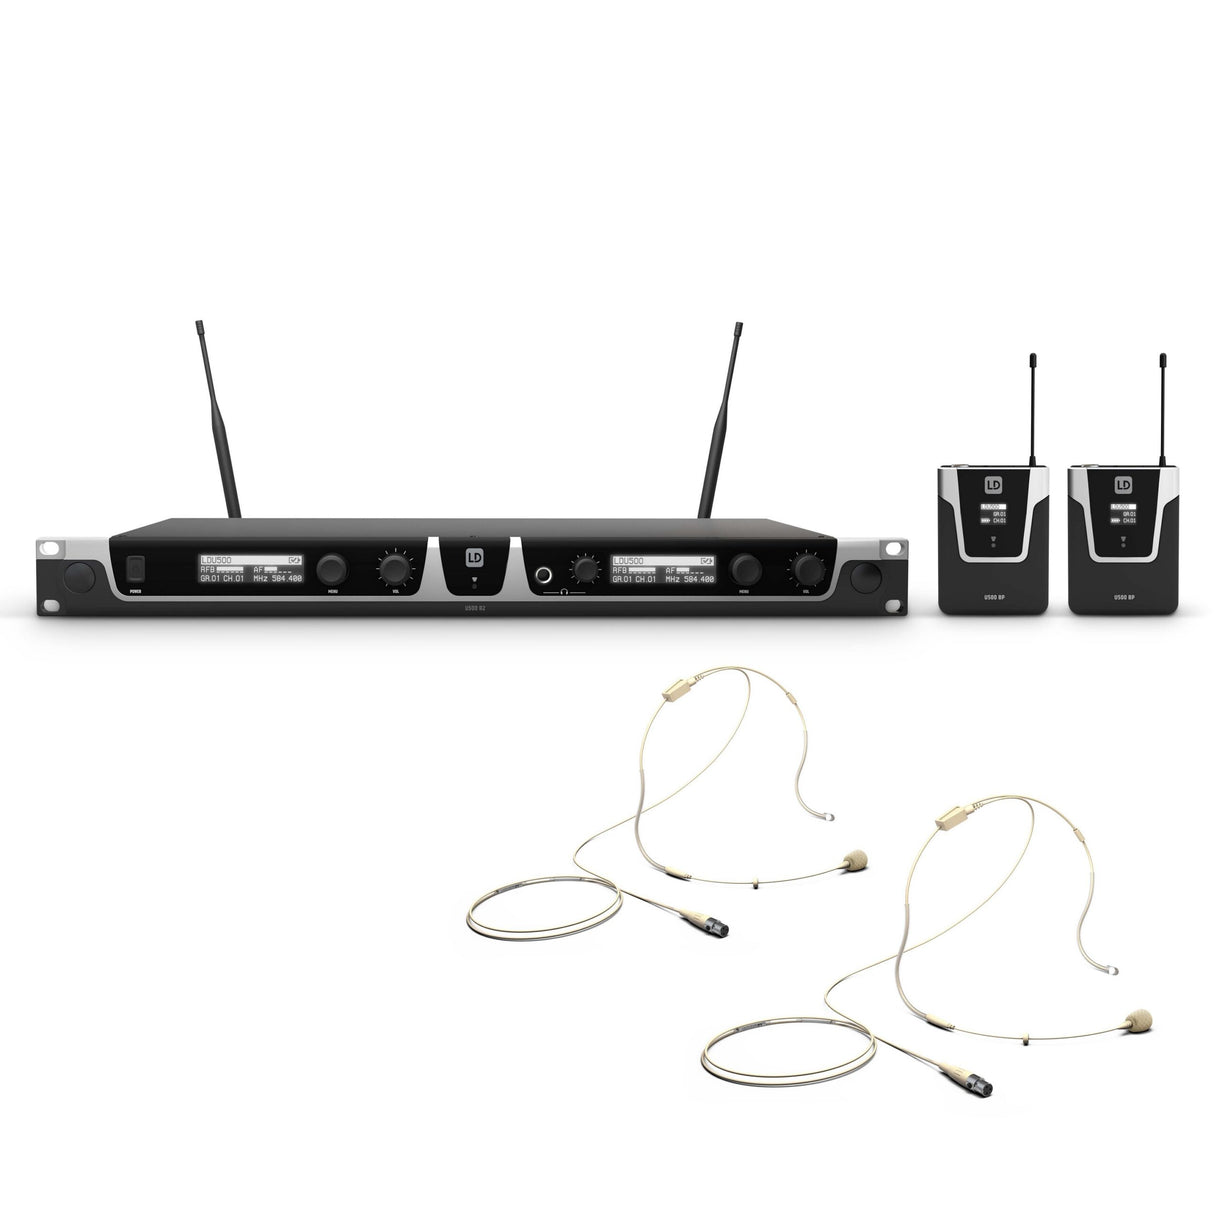 LD Systems U505 BPHH 2 Wireless Microphone System with Bodypacks and Headsets, Beige